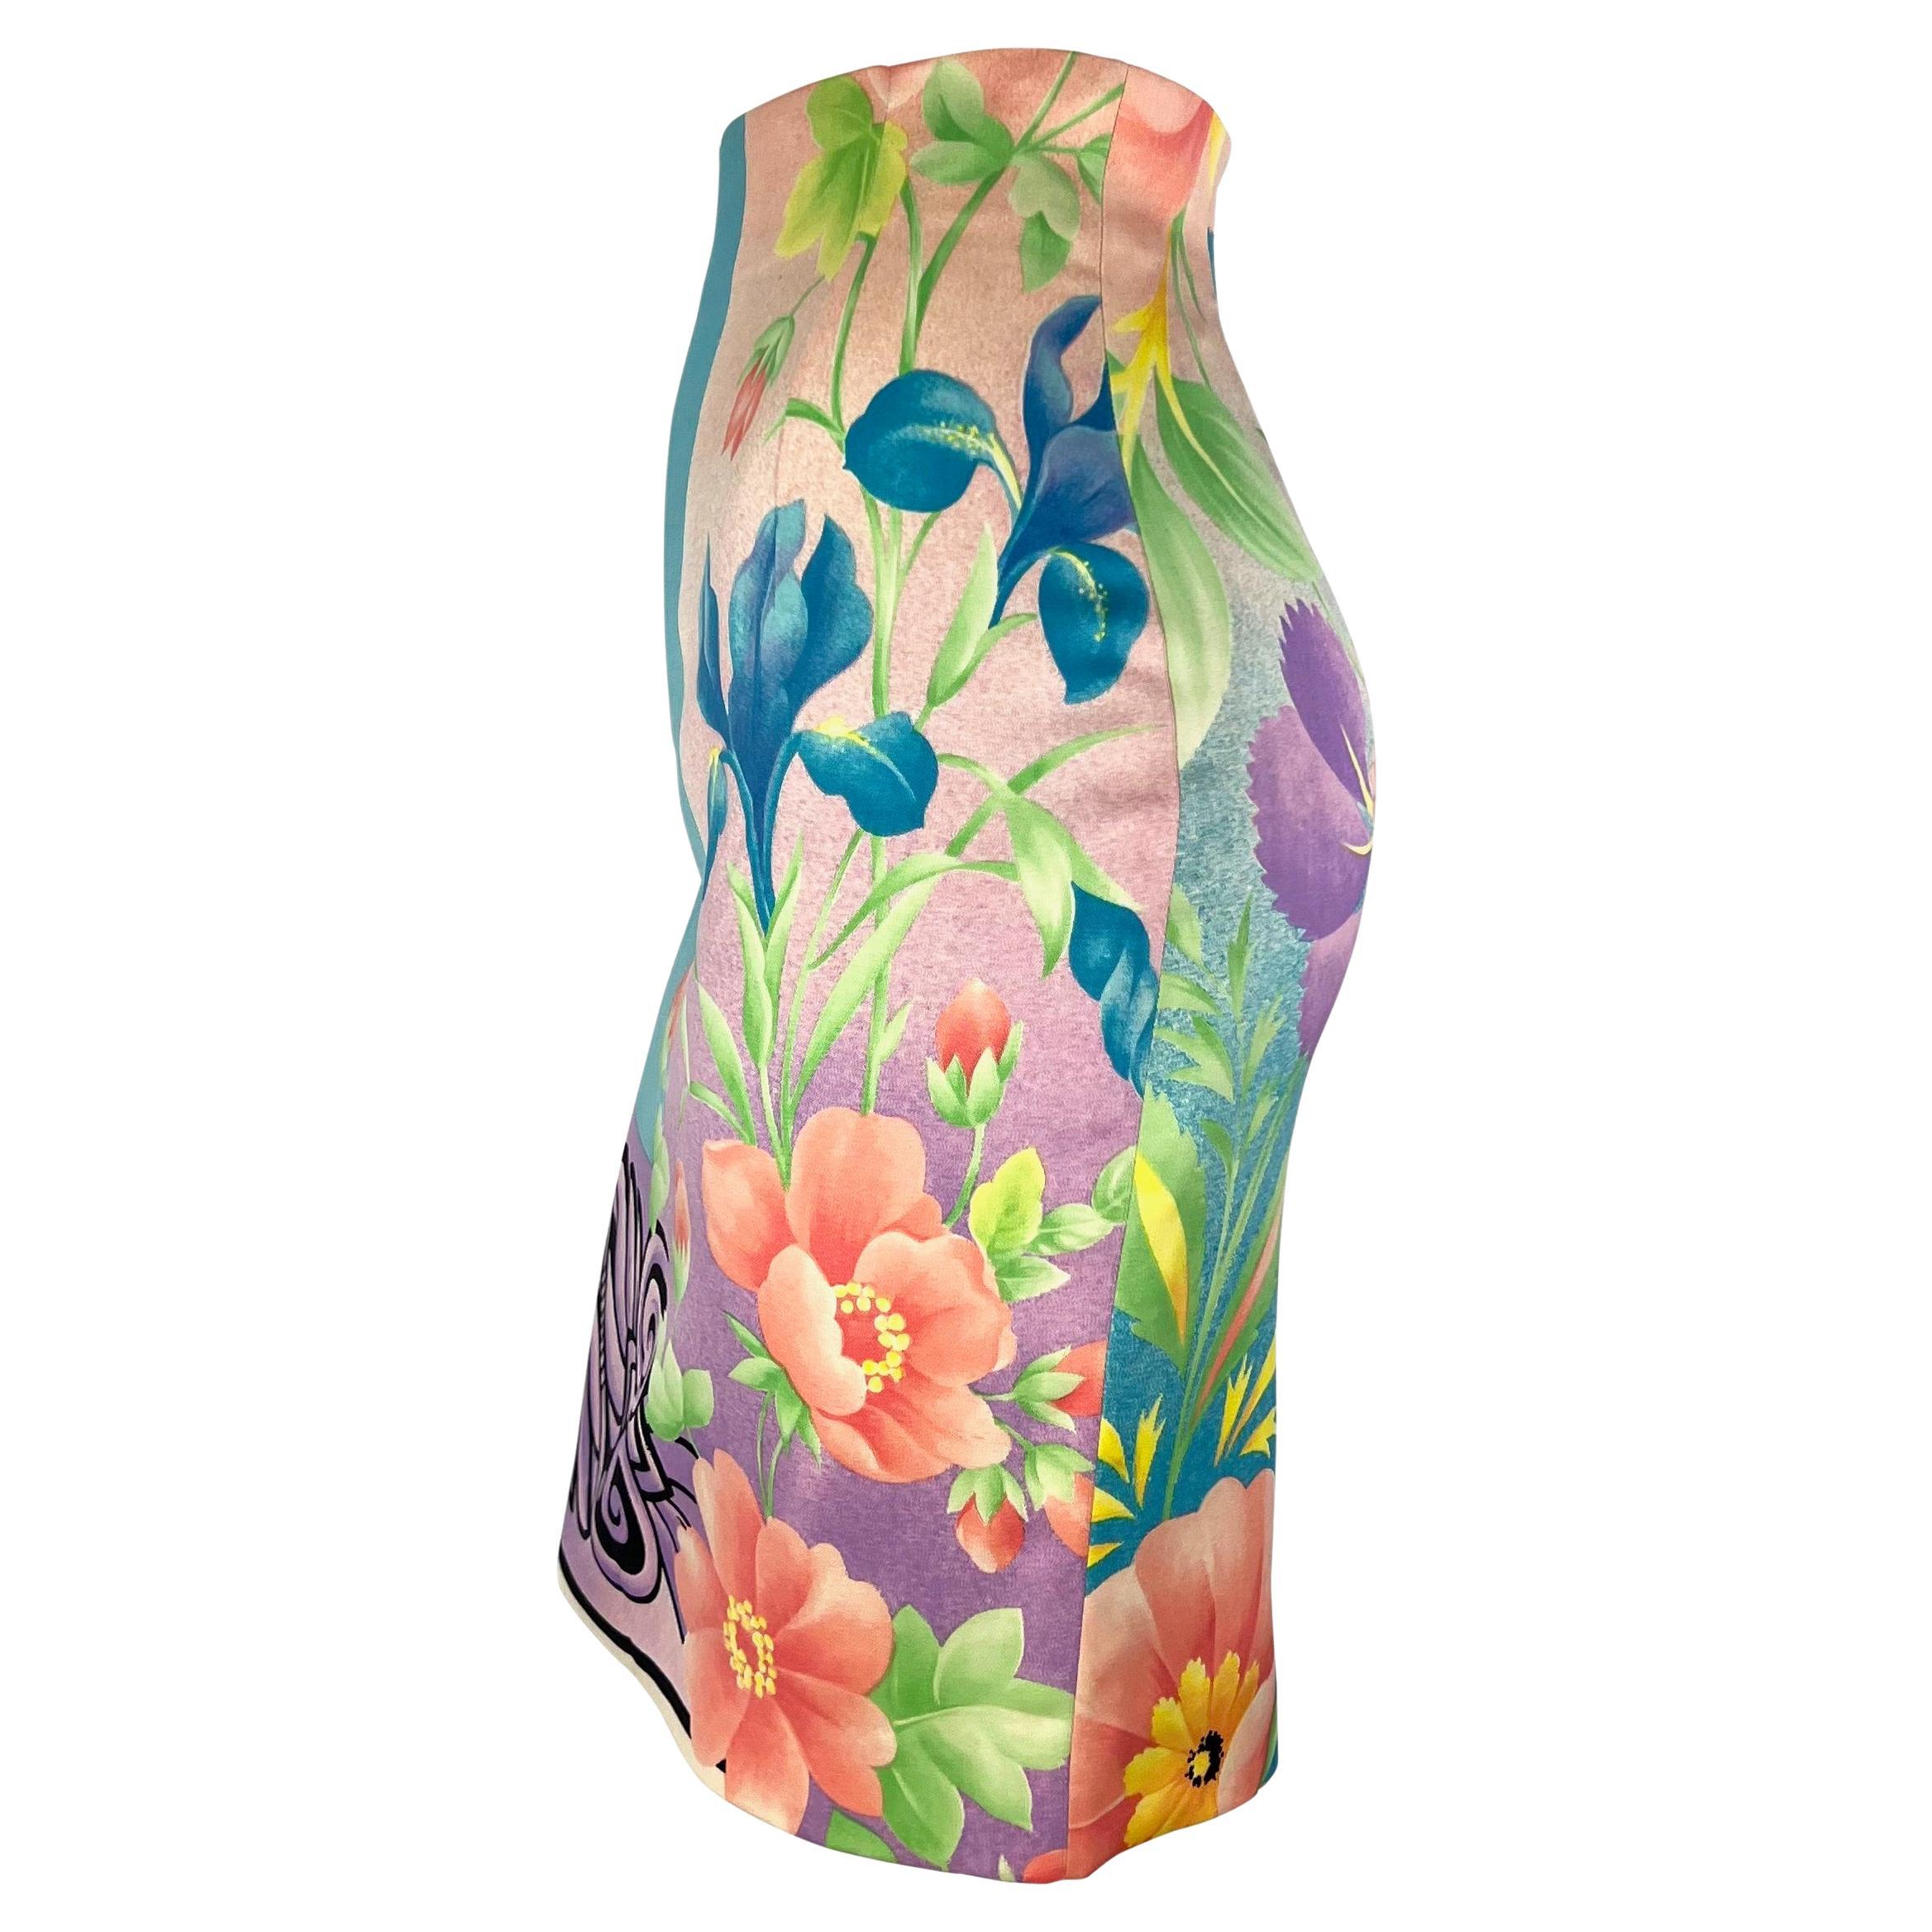 S/S 1992 Gianni Versace Couture Pastel Floral Mask Print Blue Pencil Skirt In Good Condition For Sale In West Hollywood, CA